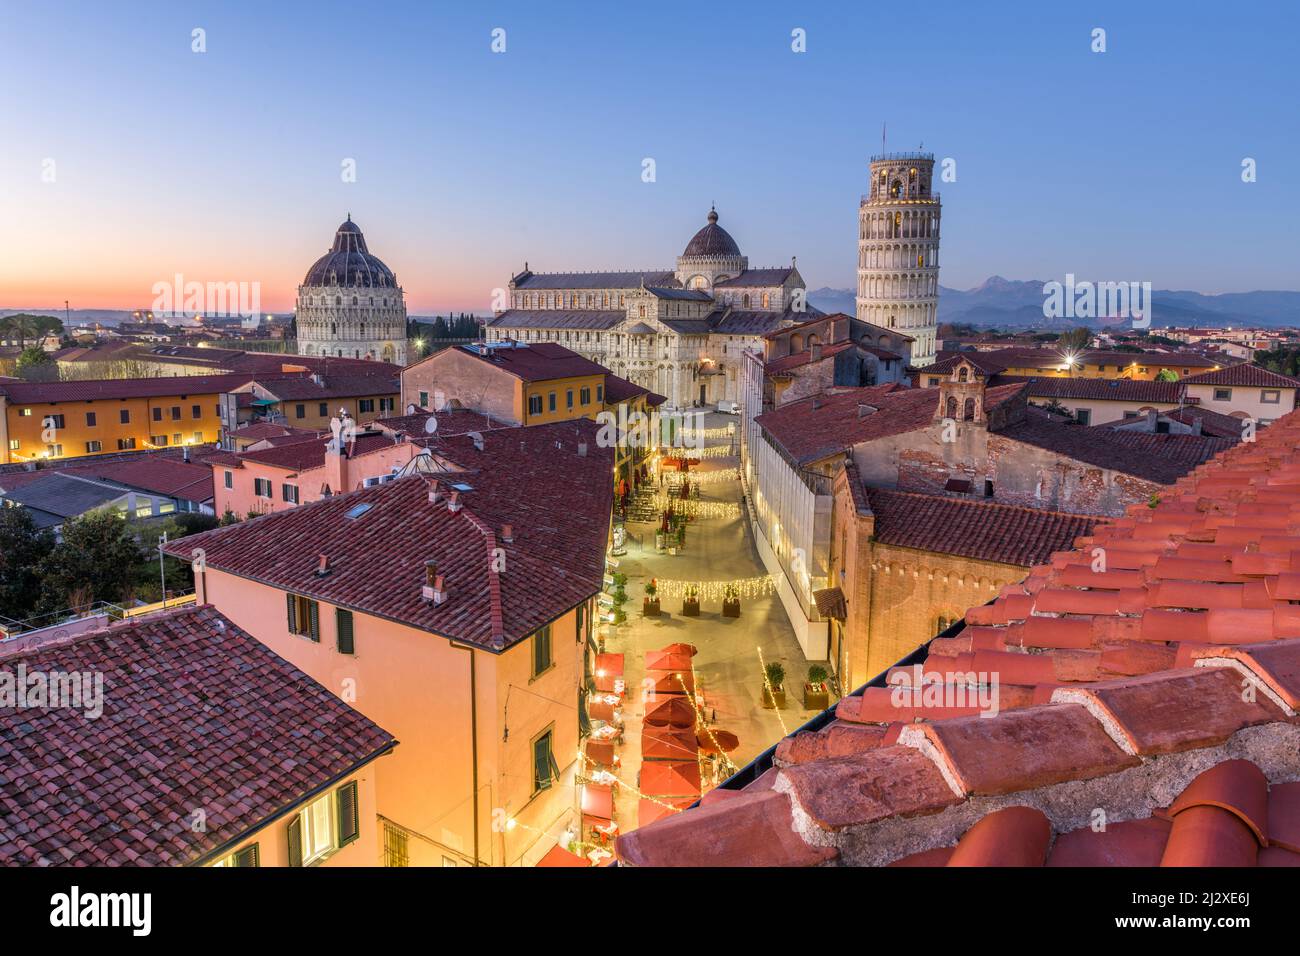 Pisa, Italy with the Duomo and Leaning Tower at dusk. Stock Photo